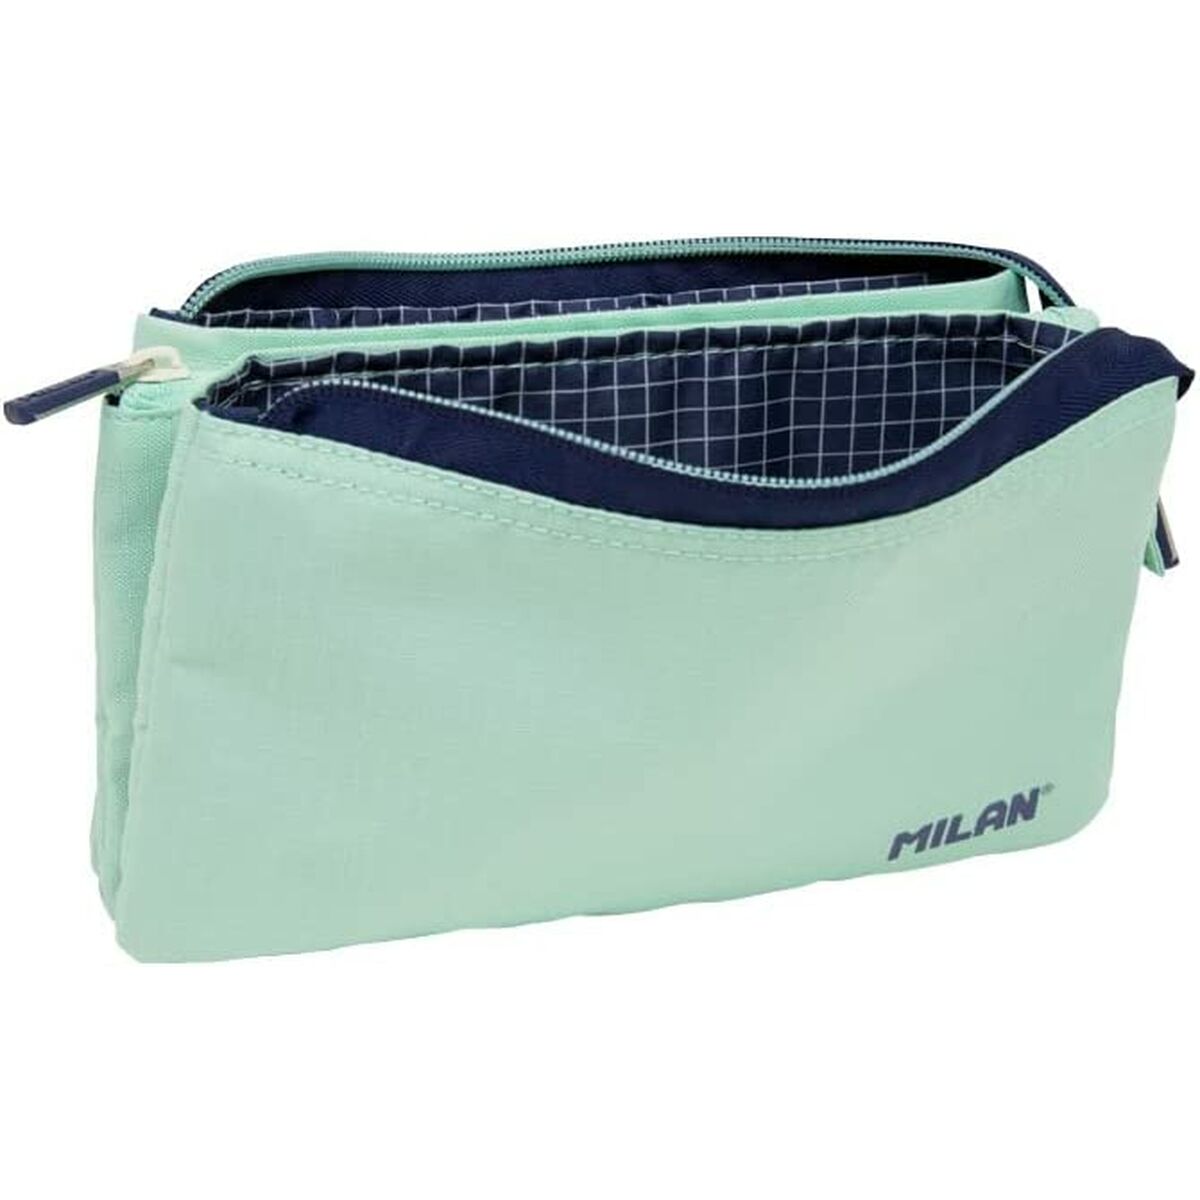 Holdall Milan 1918 5 compartments Green (22 x 12 x 4 cm)